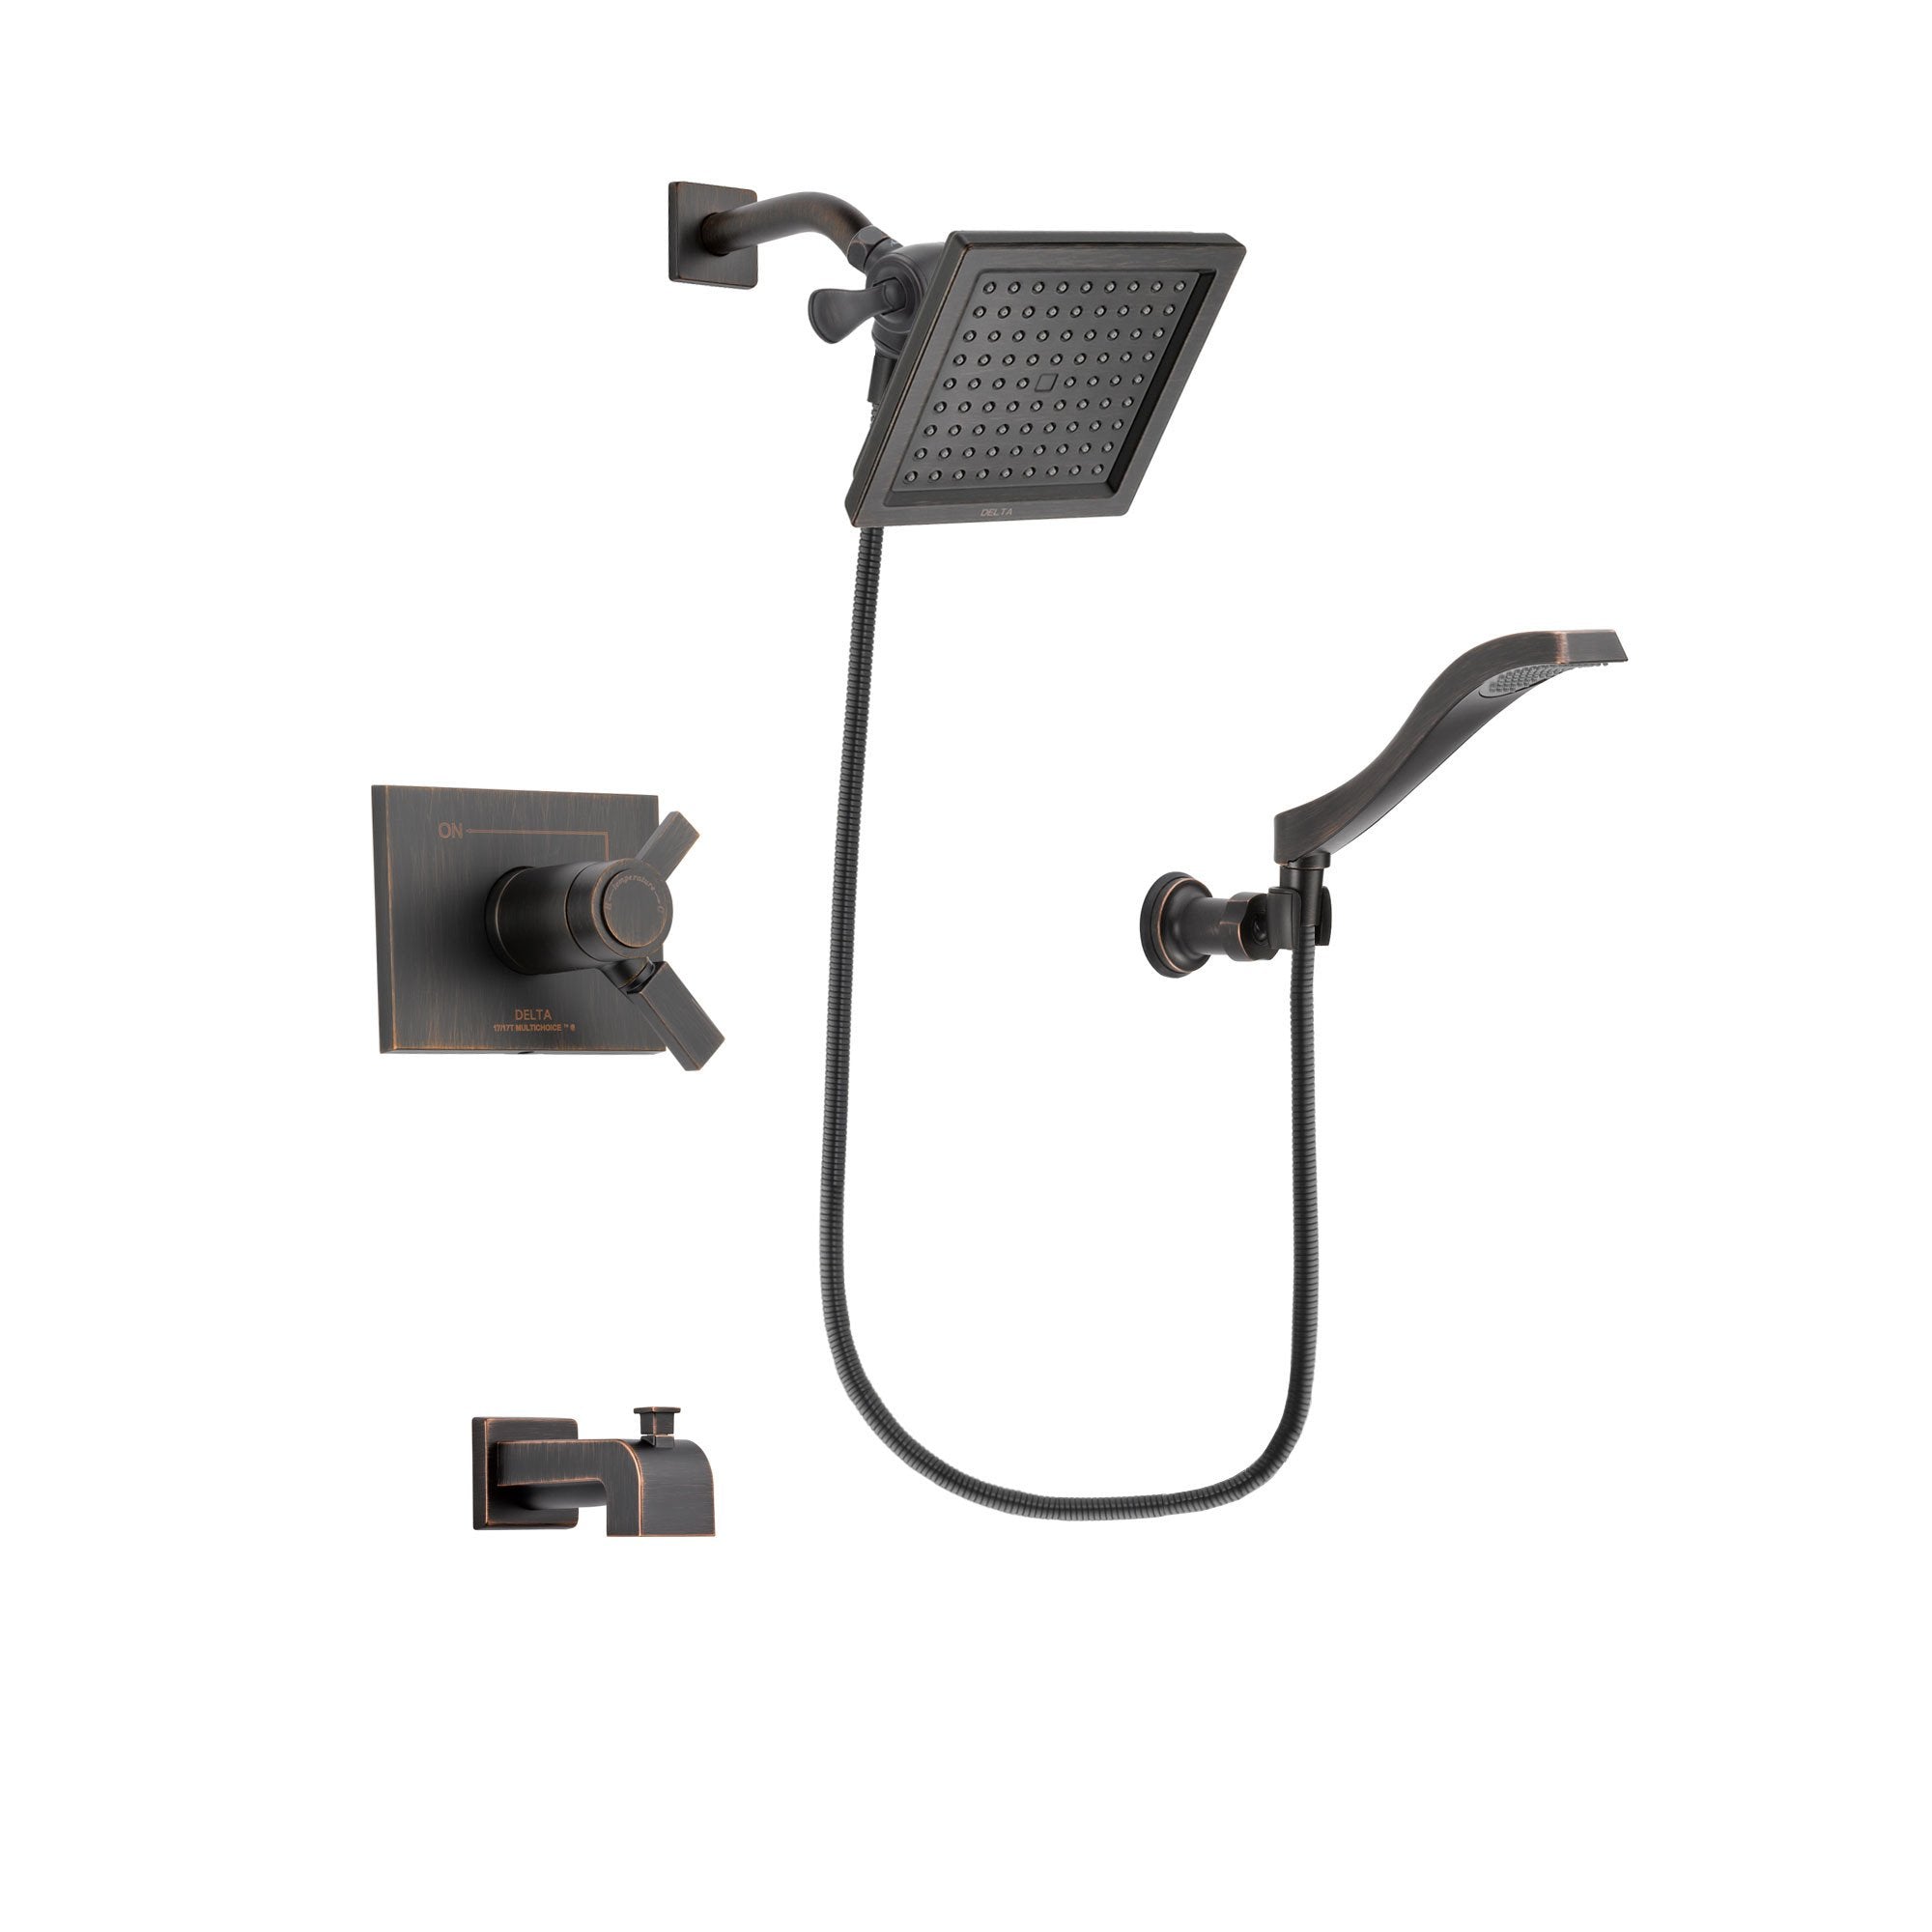 Delta Vero Venetian Bronze Finish Thermostatic Tub and Shower Faucet System Package with 6.5-inch Square Rain Showerhead and Modern Wall Mount Handheld Shower Spray Includes Rough-in Valve and Tub Spout DSP3223V